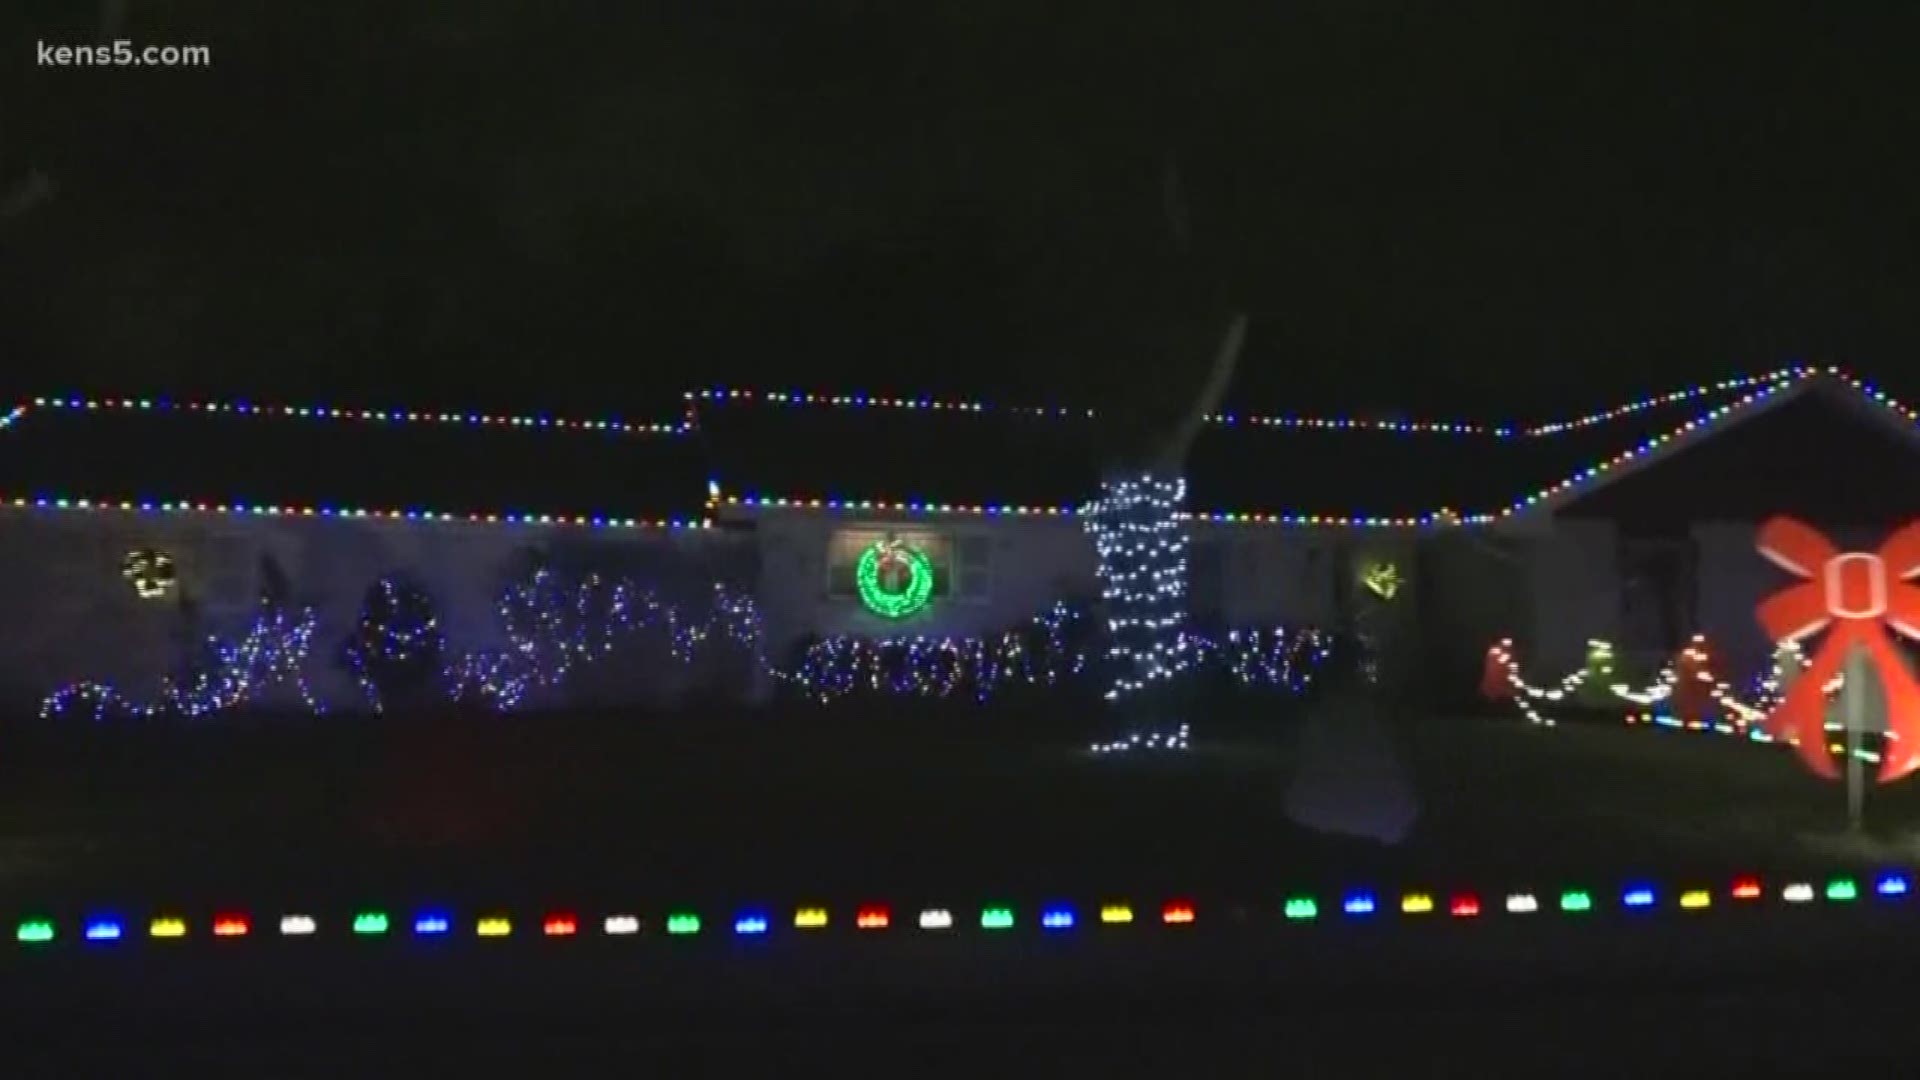 Residents of Windcrest, TX are putting final touches on their Christmas decorations tonight in preparation for their 60th annual Windcrest Light Up experience. Eyewitness News reporter Jon Coker stopped by to see how it's all coming along.